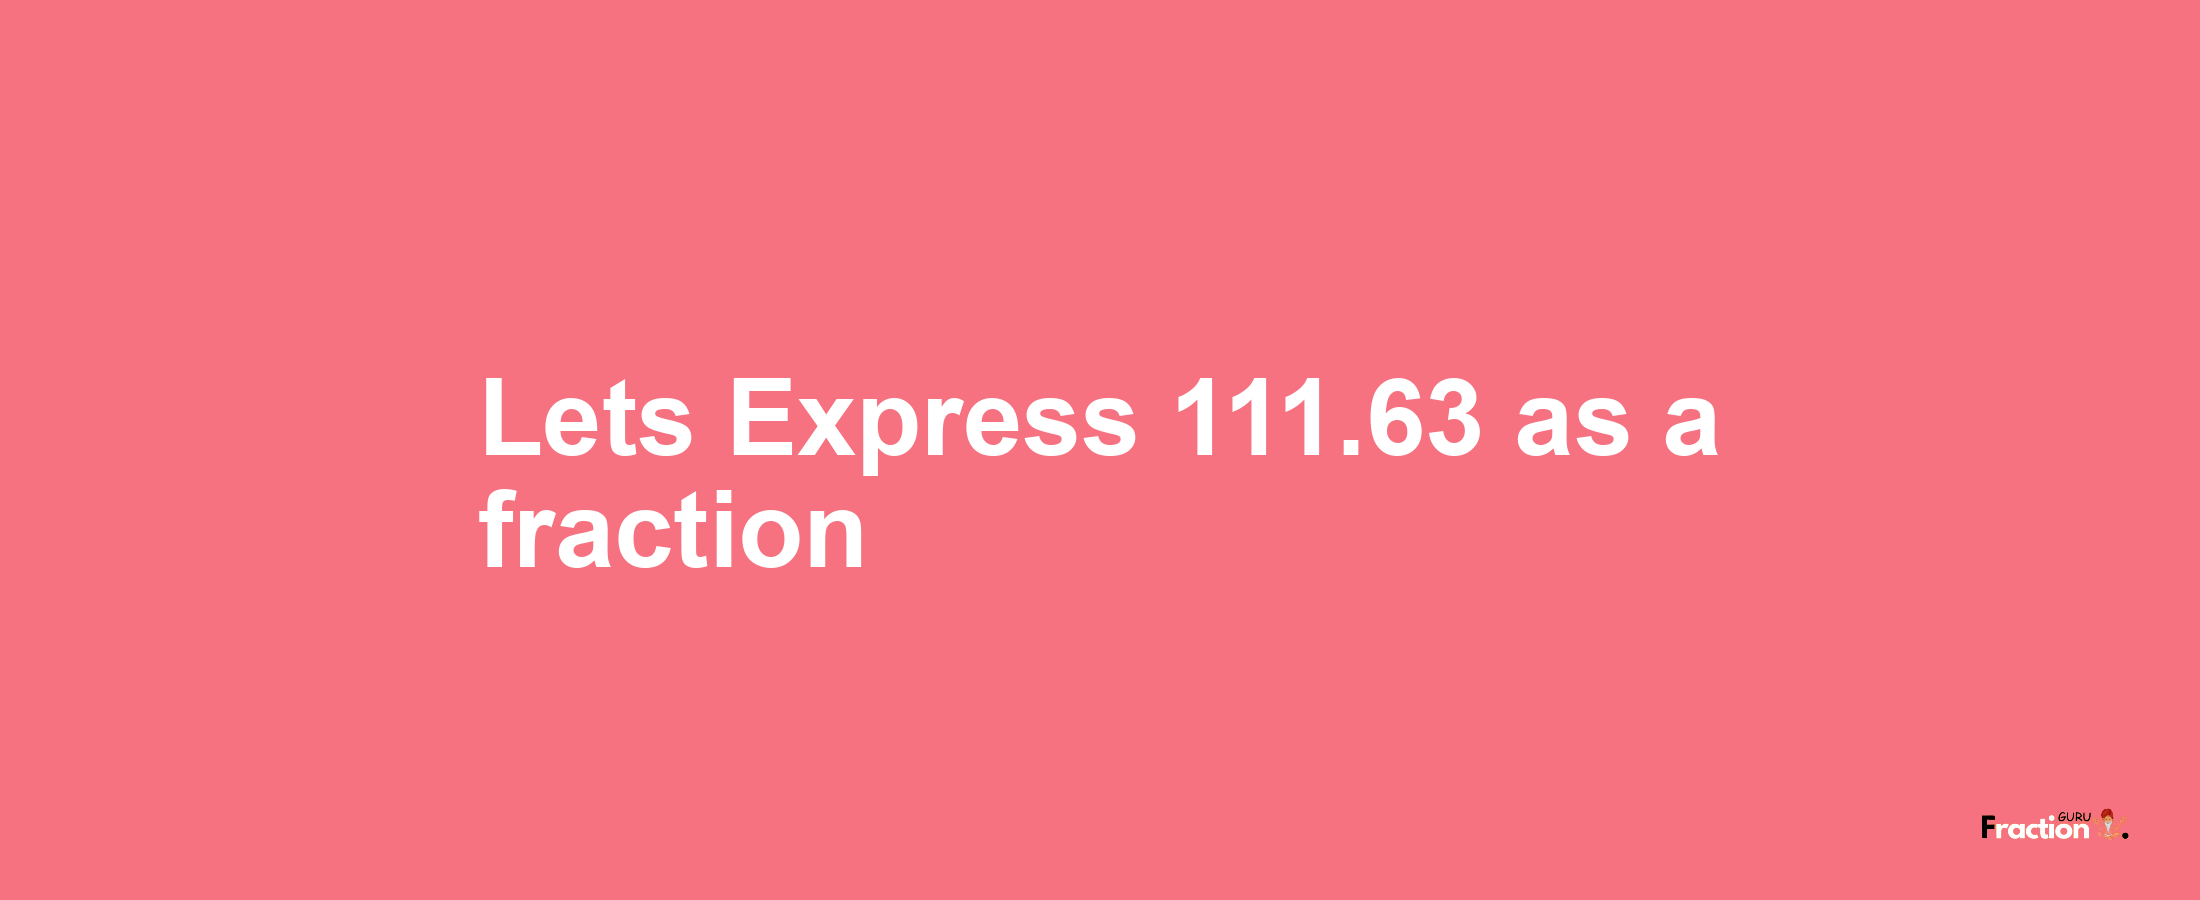 Lets Express 111.63 as afraction